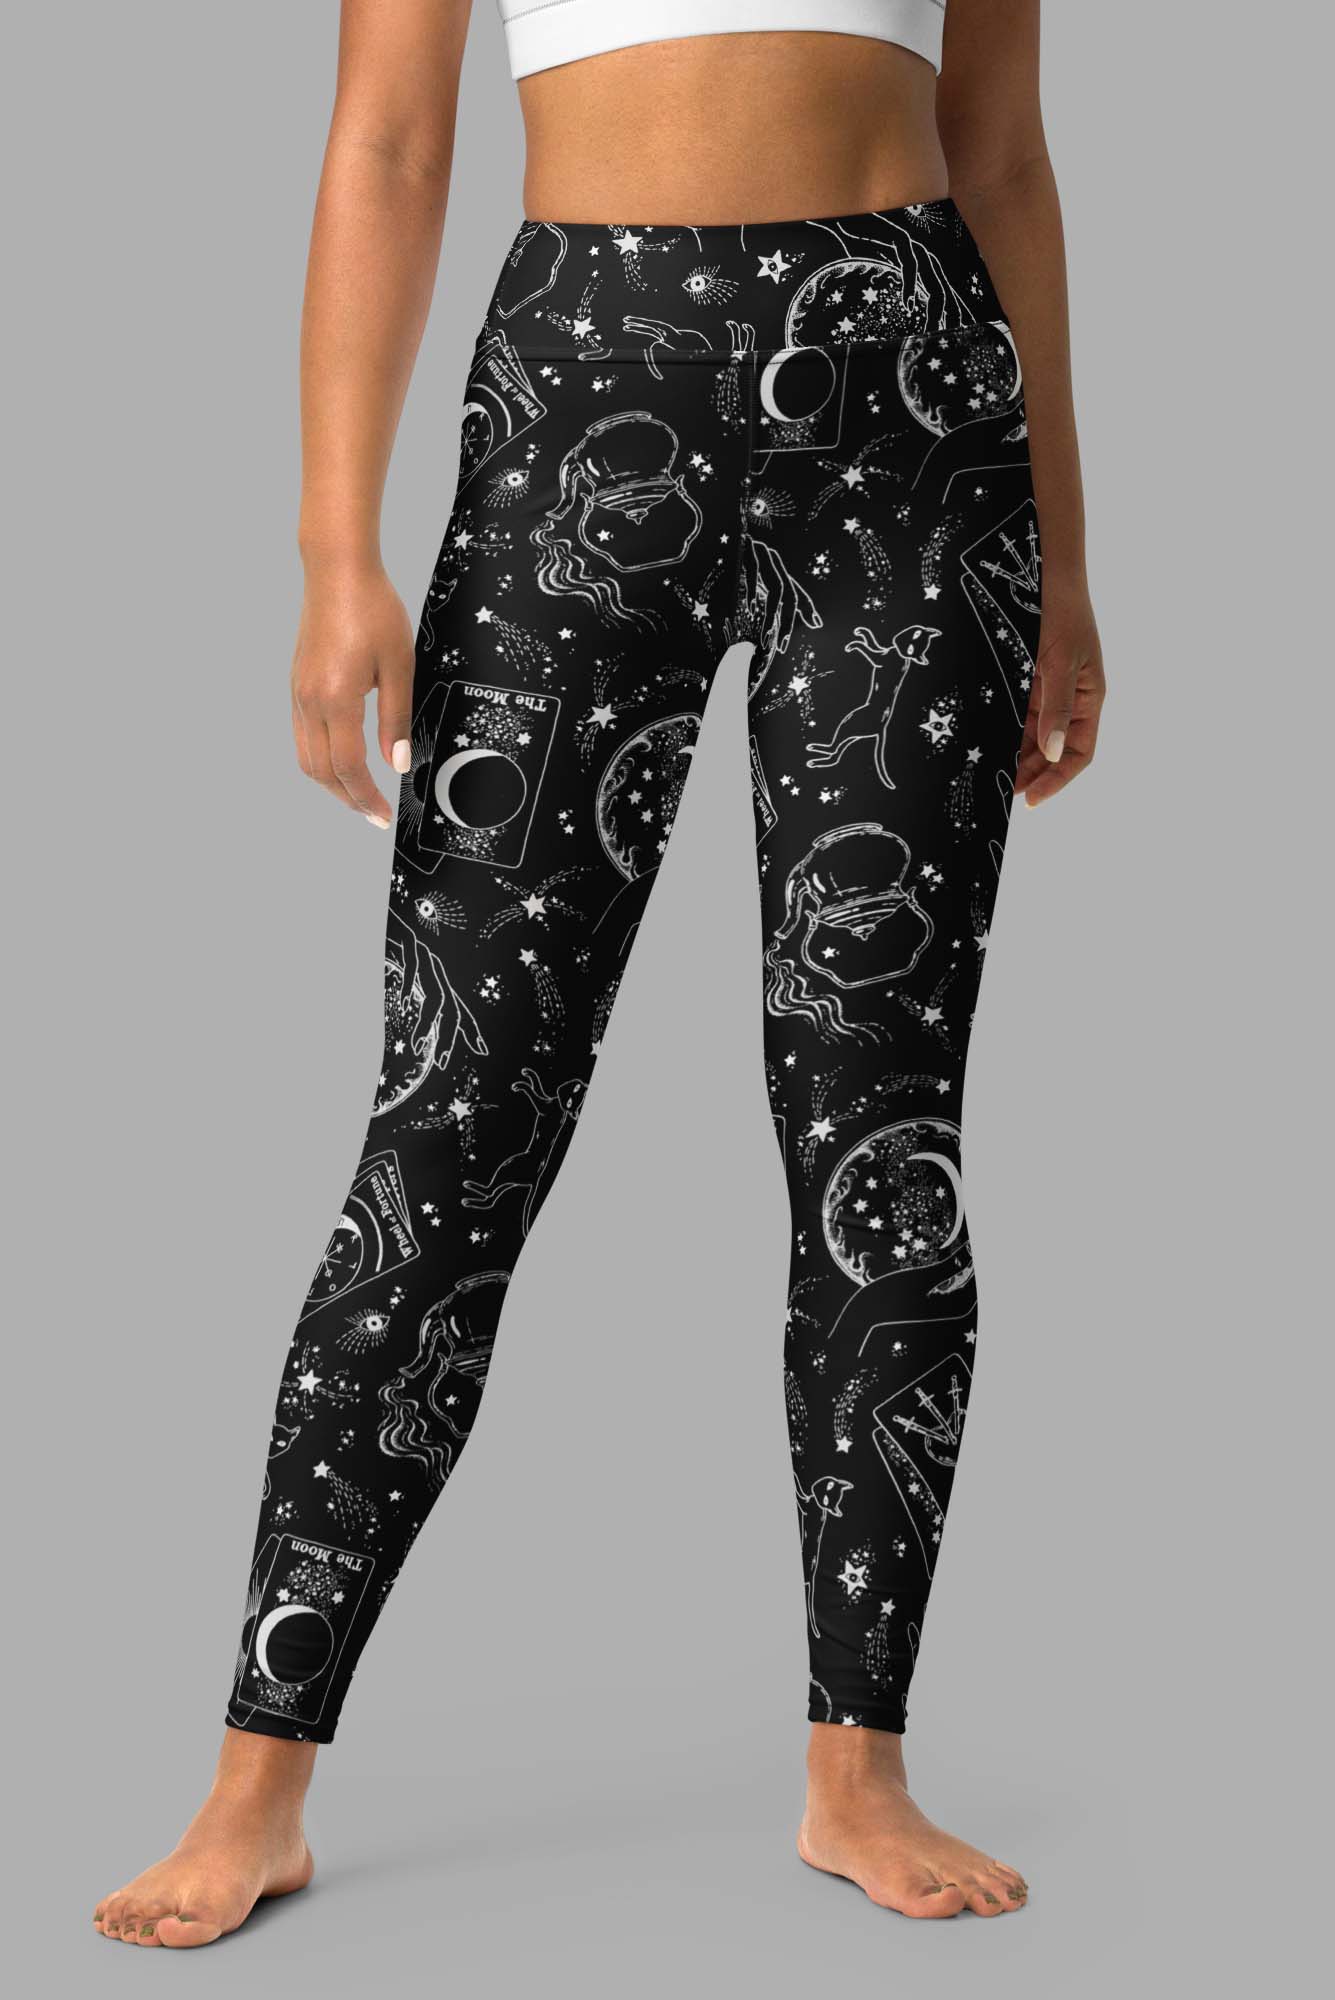 https://cosmicdrifters.com/wp-content/uploads/cosmic-drifters-travelling-carnival-print-one-piece-yoga-leggings.jpg